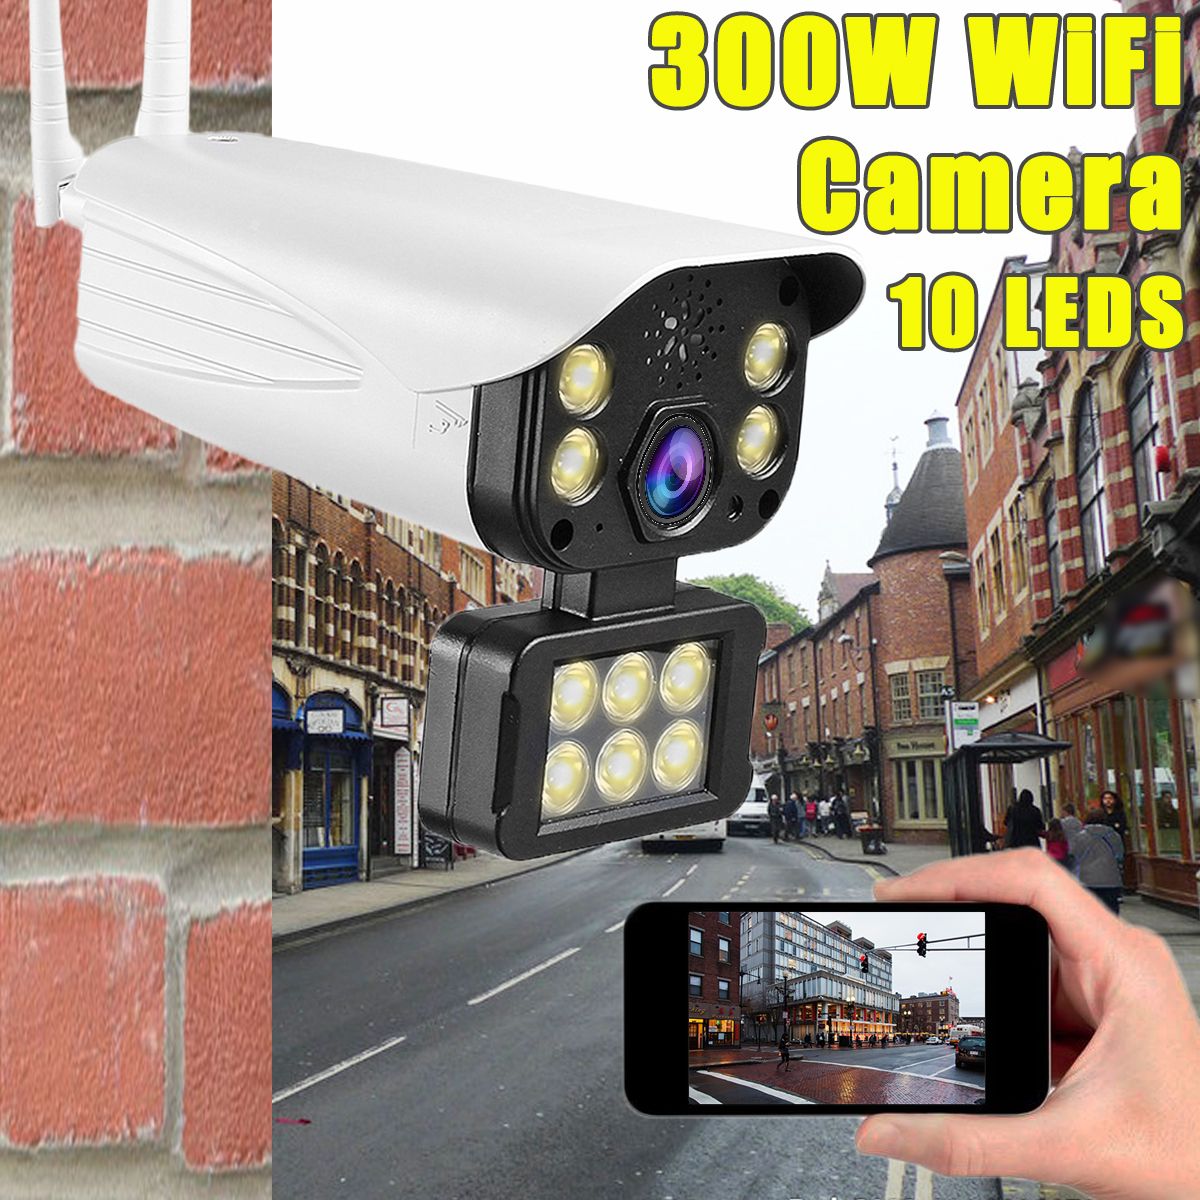 10-LEDS-300W-WiFi-Wireless-Security-IP-Camera-Monitor-Full-Color-Night-Vision-1546282